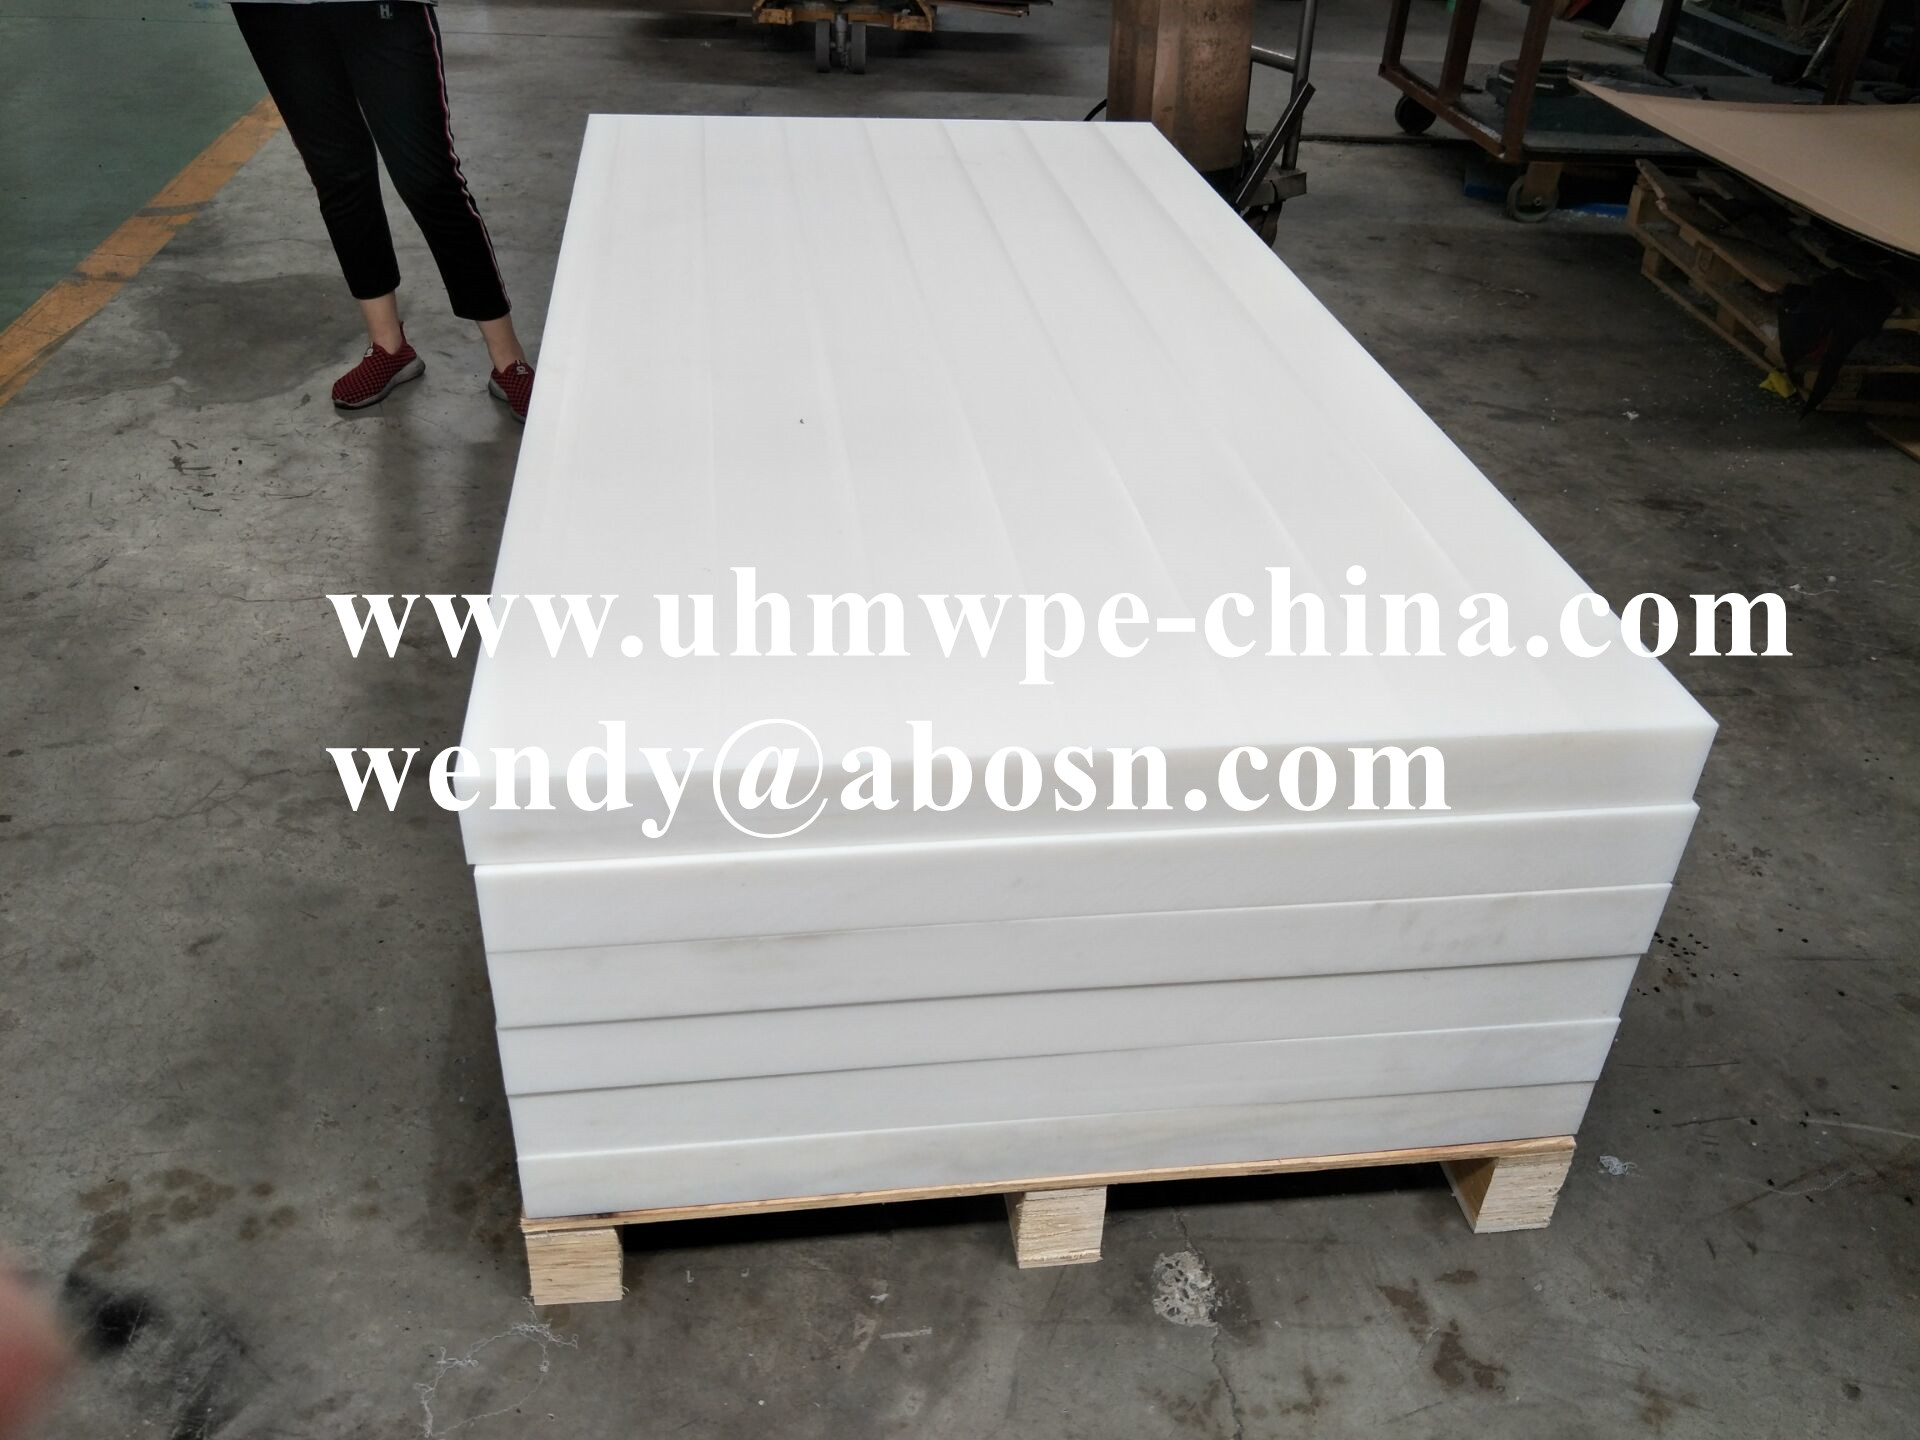 High Temperature Resistance UHMWPE Truck Liner